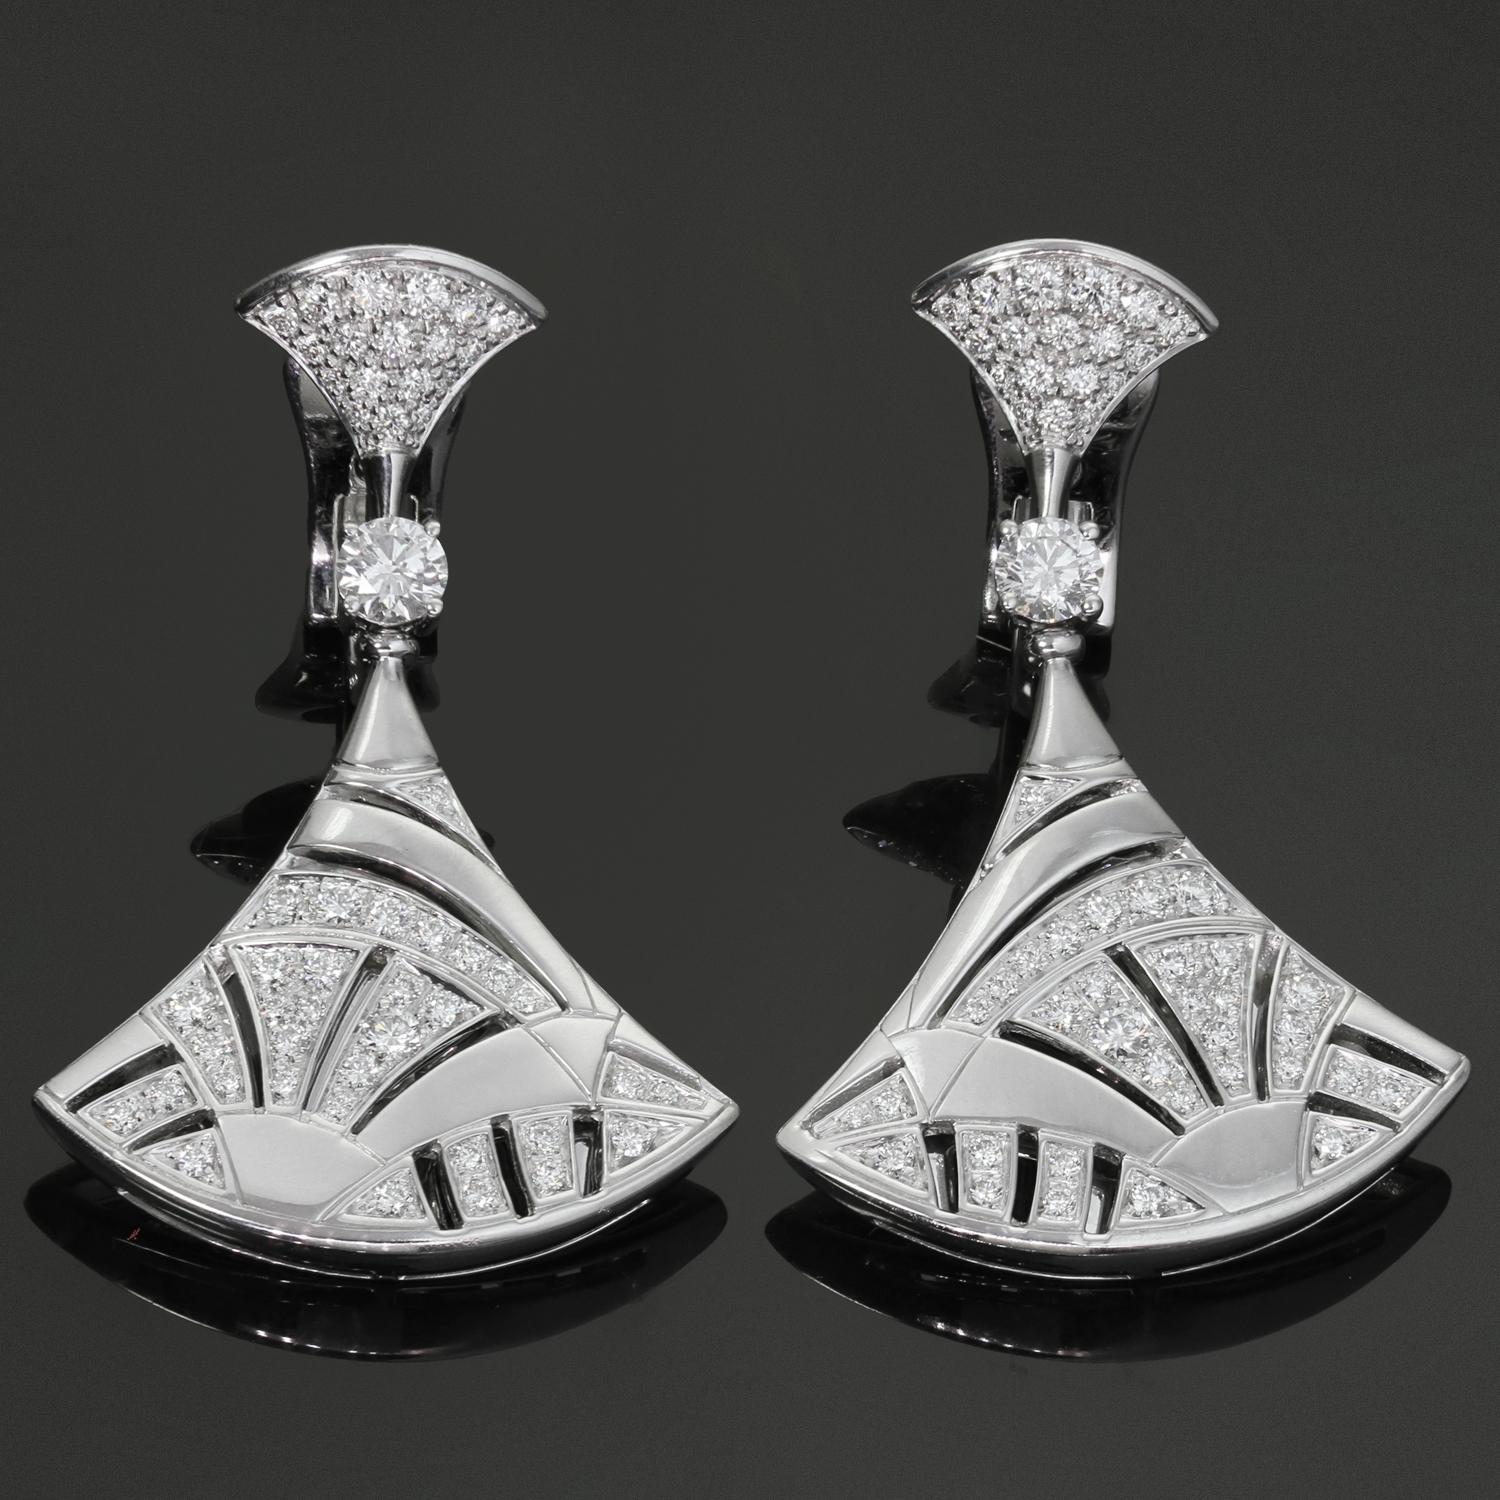 These fabulous Bvlgari earrings from the classic Diva's Dream collection features a mosaic fan design crafted in 18k white gold and set with 106 round brilliant E-F-G VVS1-VVS2 diamonds weighing an estimated 2.10 carats.  Signed Bvlgari, numbered,